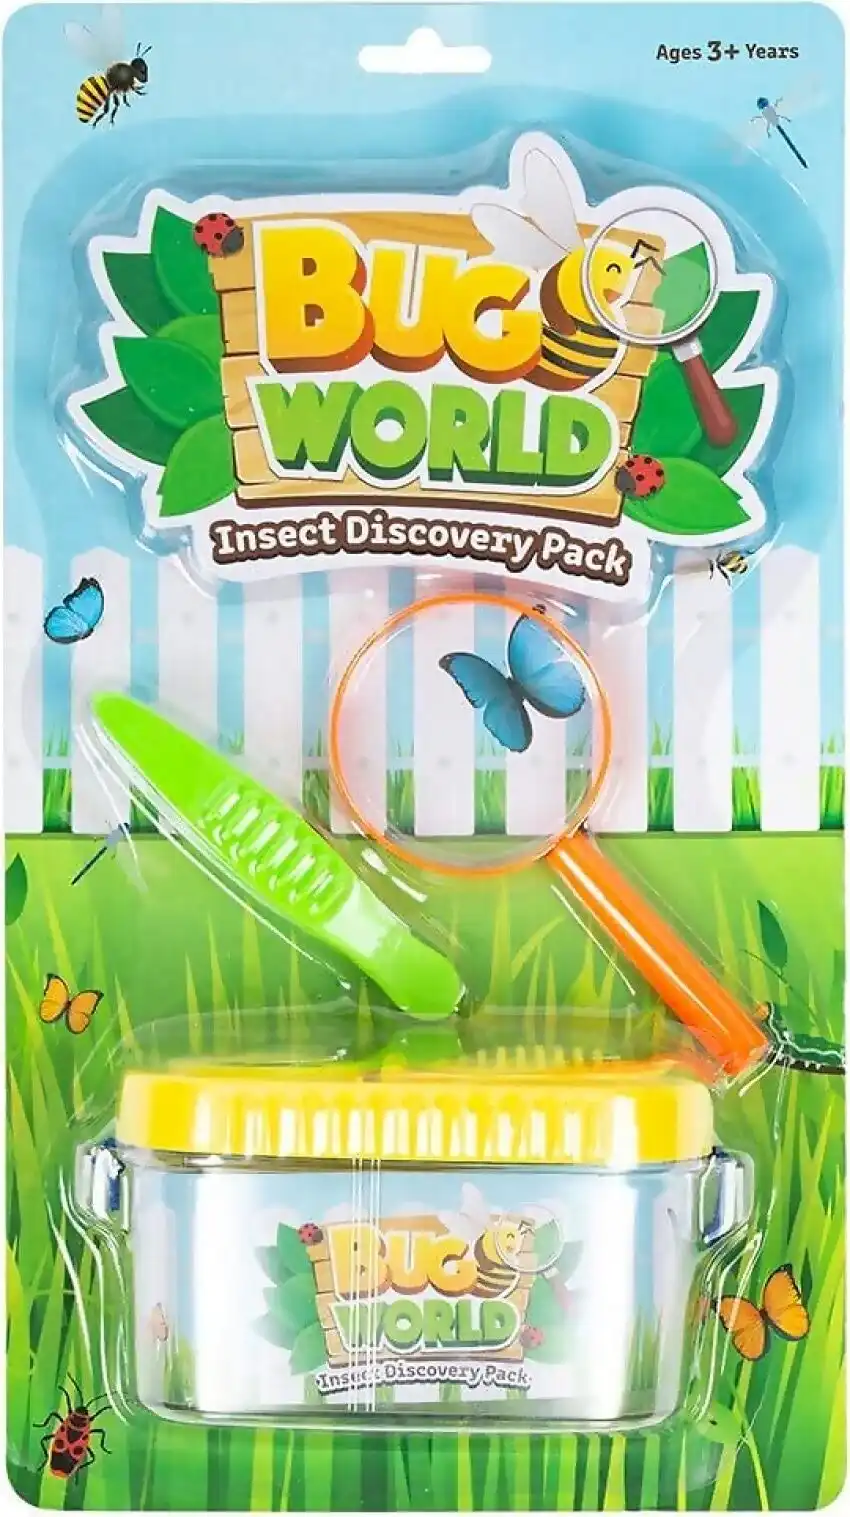 Bugs World - Insect Discovery Pack